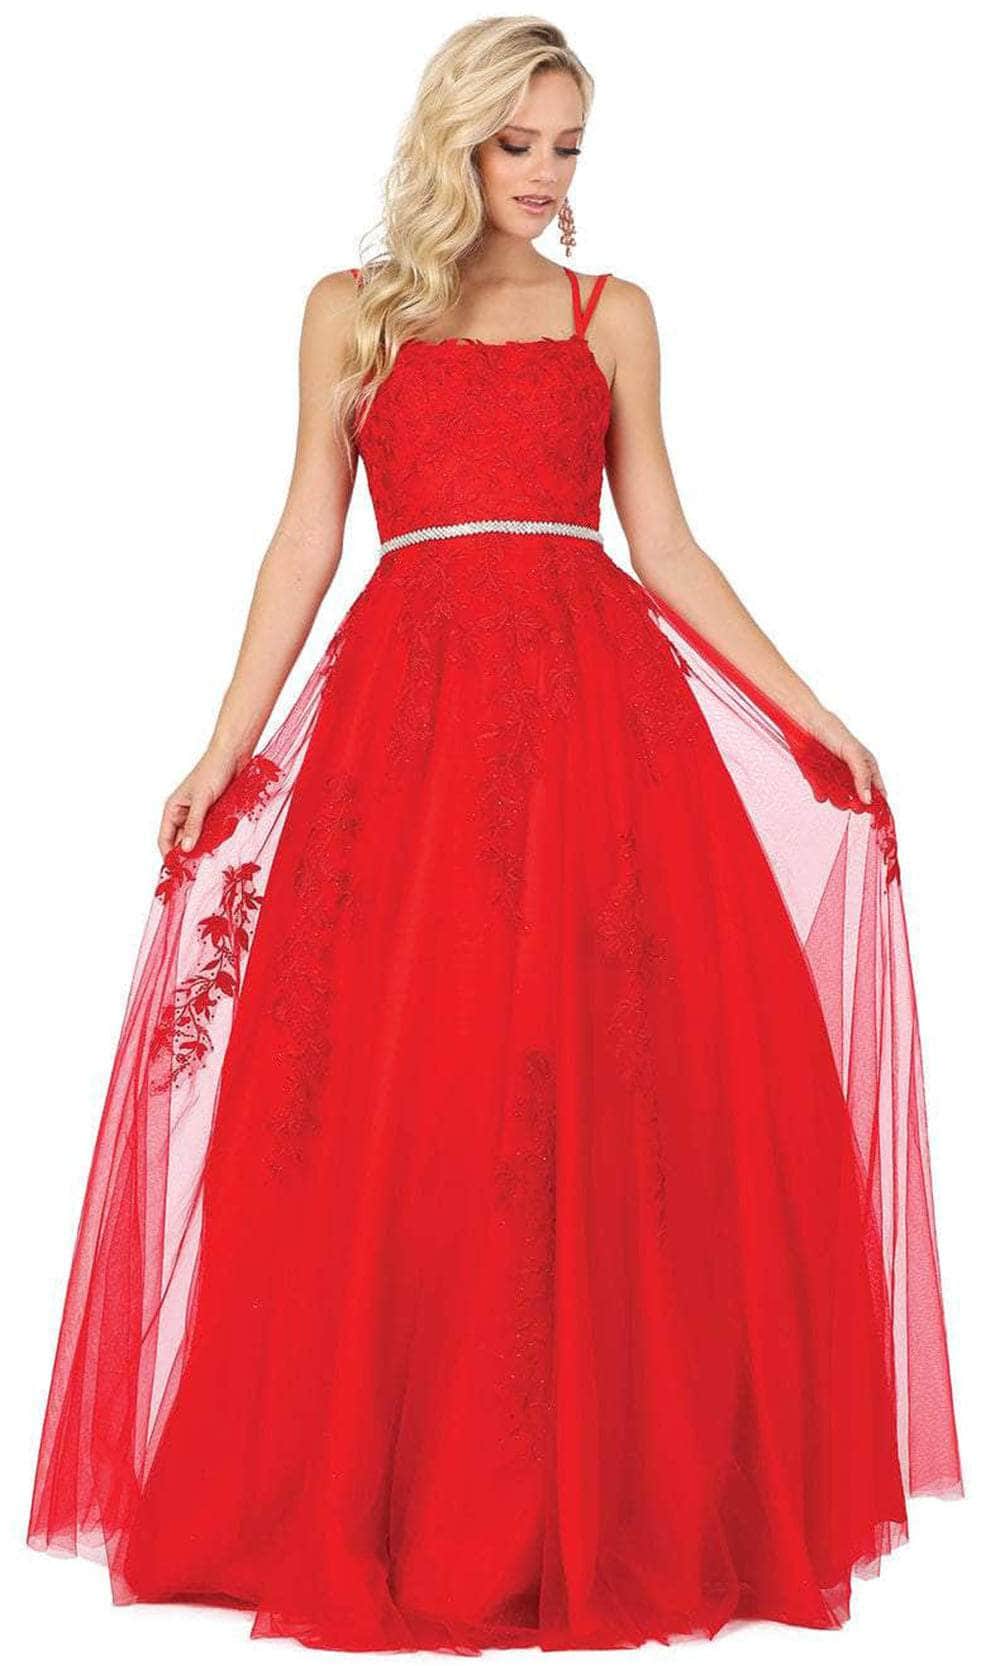 Dancing Queen 2942 - Embellished Sleeveless Straight Across Evening Dress Special Occasion Dress XS / Red